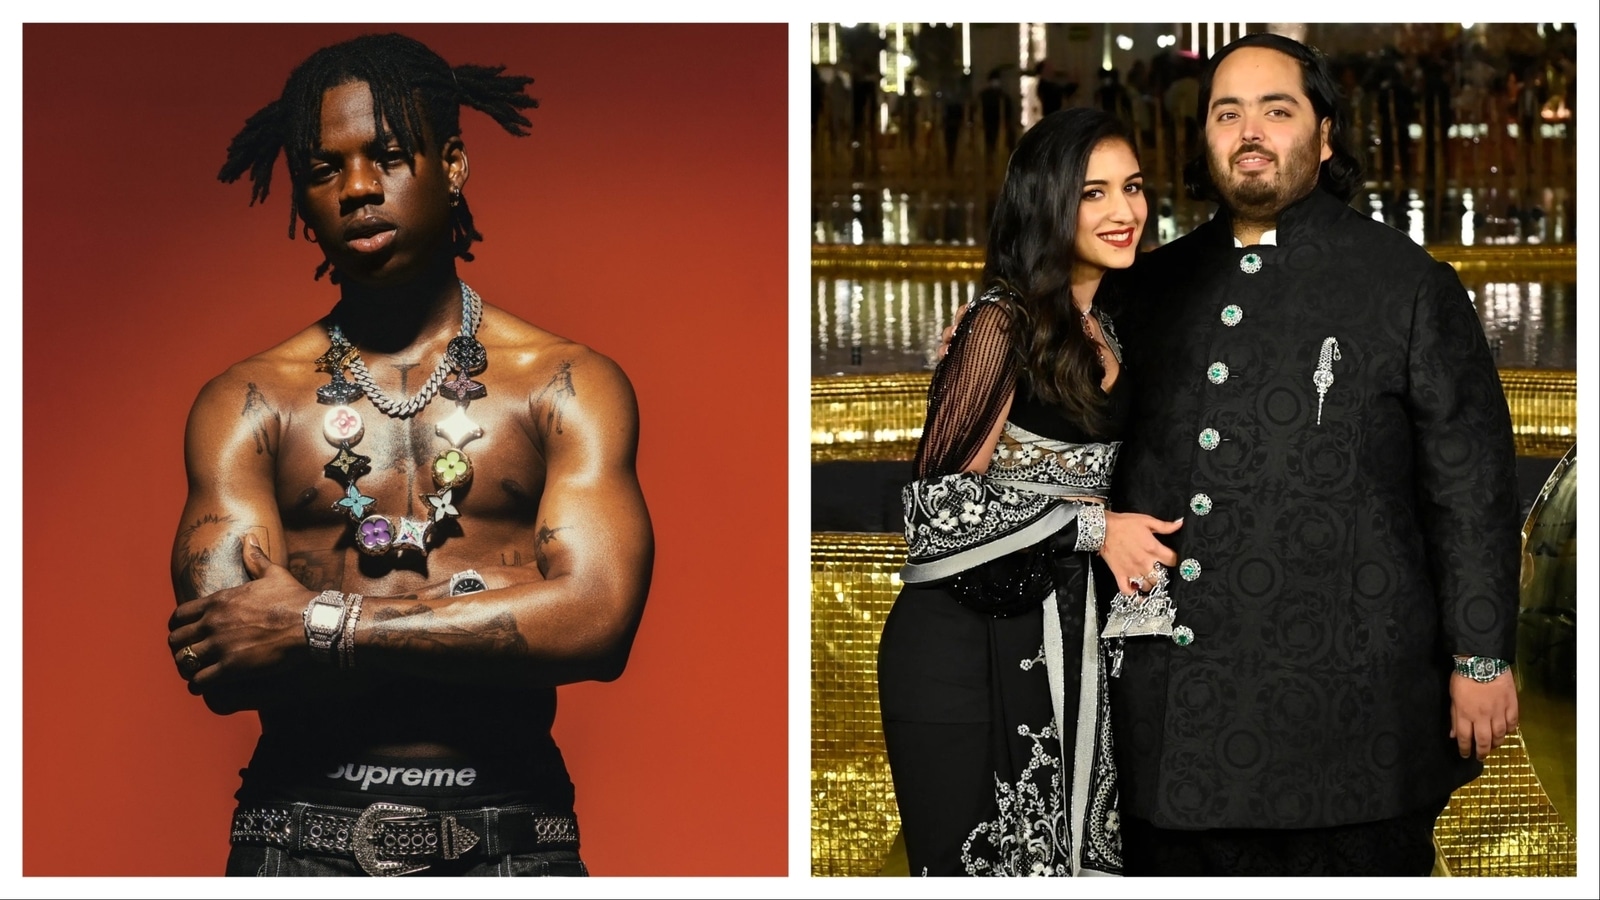 Exclusive: Calm Down singer Rema gets over Rs 25 crore for performing a song at Anant Ambani and Radhika Merchant’s wedding | Bollywood